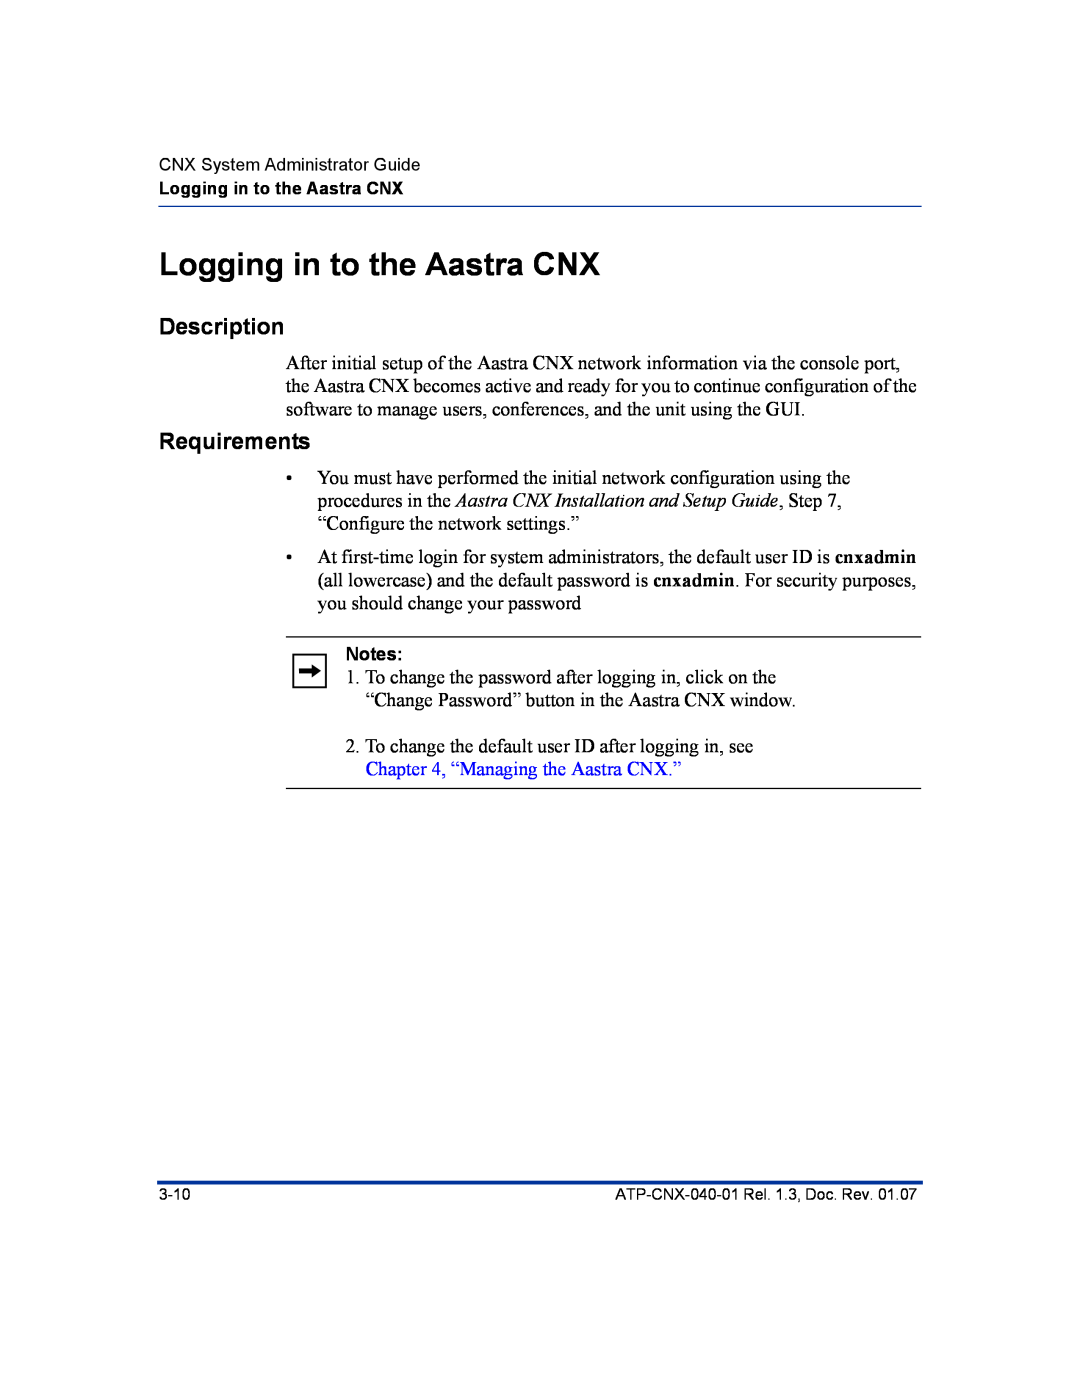 Aastra Telecom ATP-CNX-040-01 manual Logging in to the Aastra CNX, Description, Requirements 